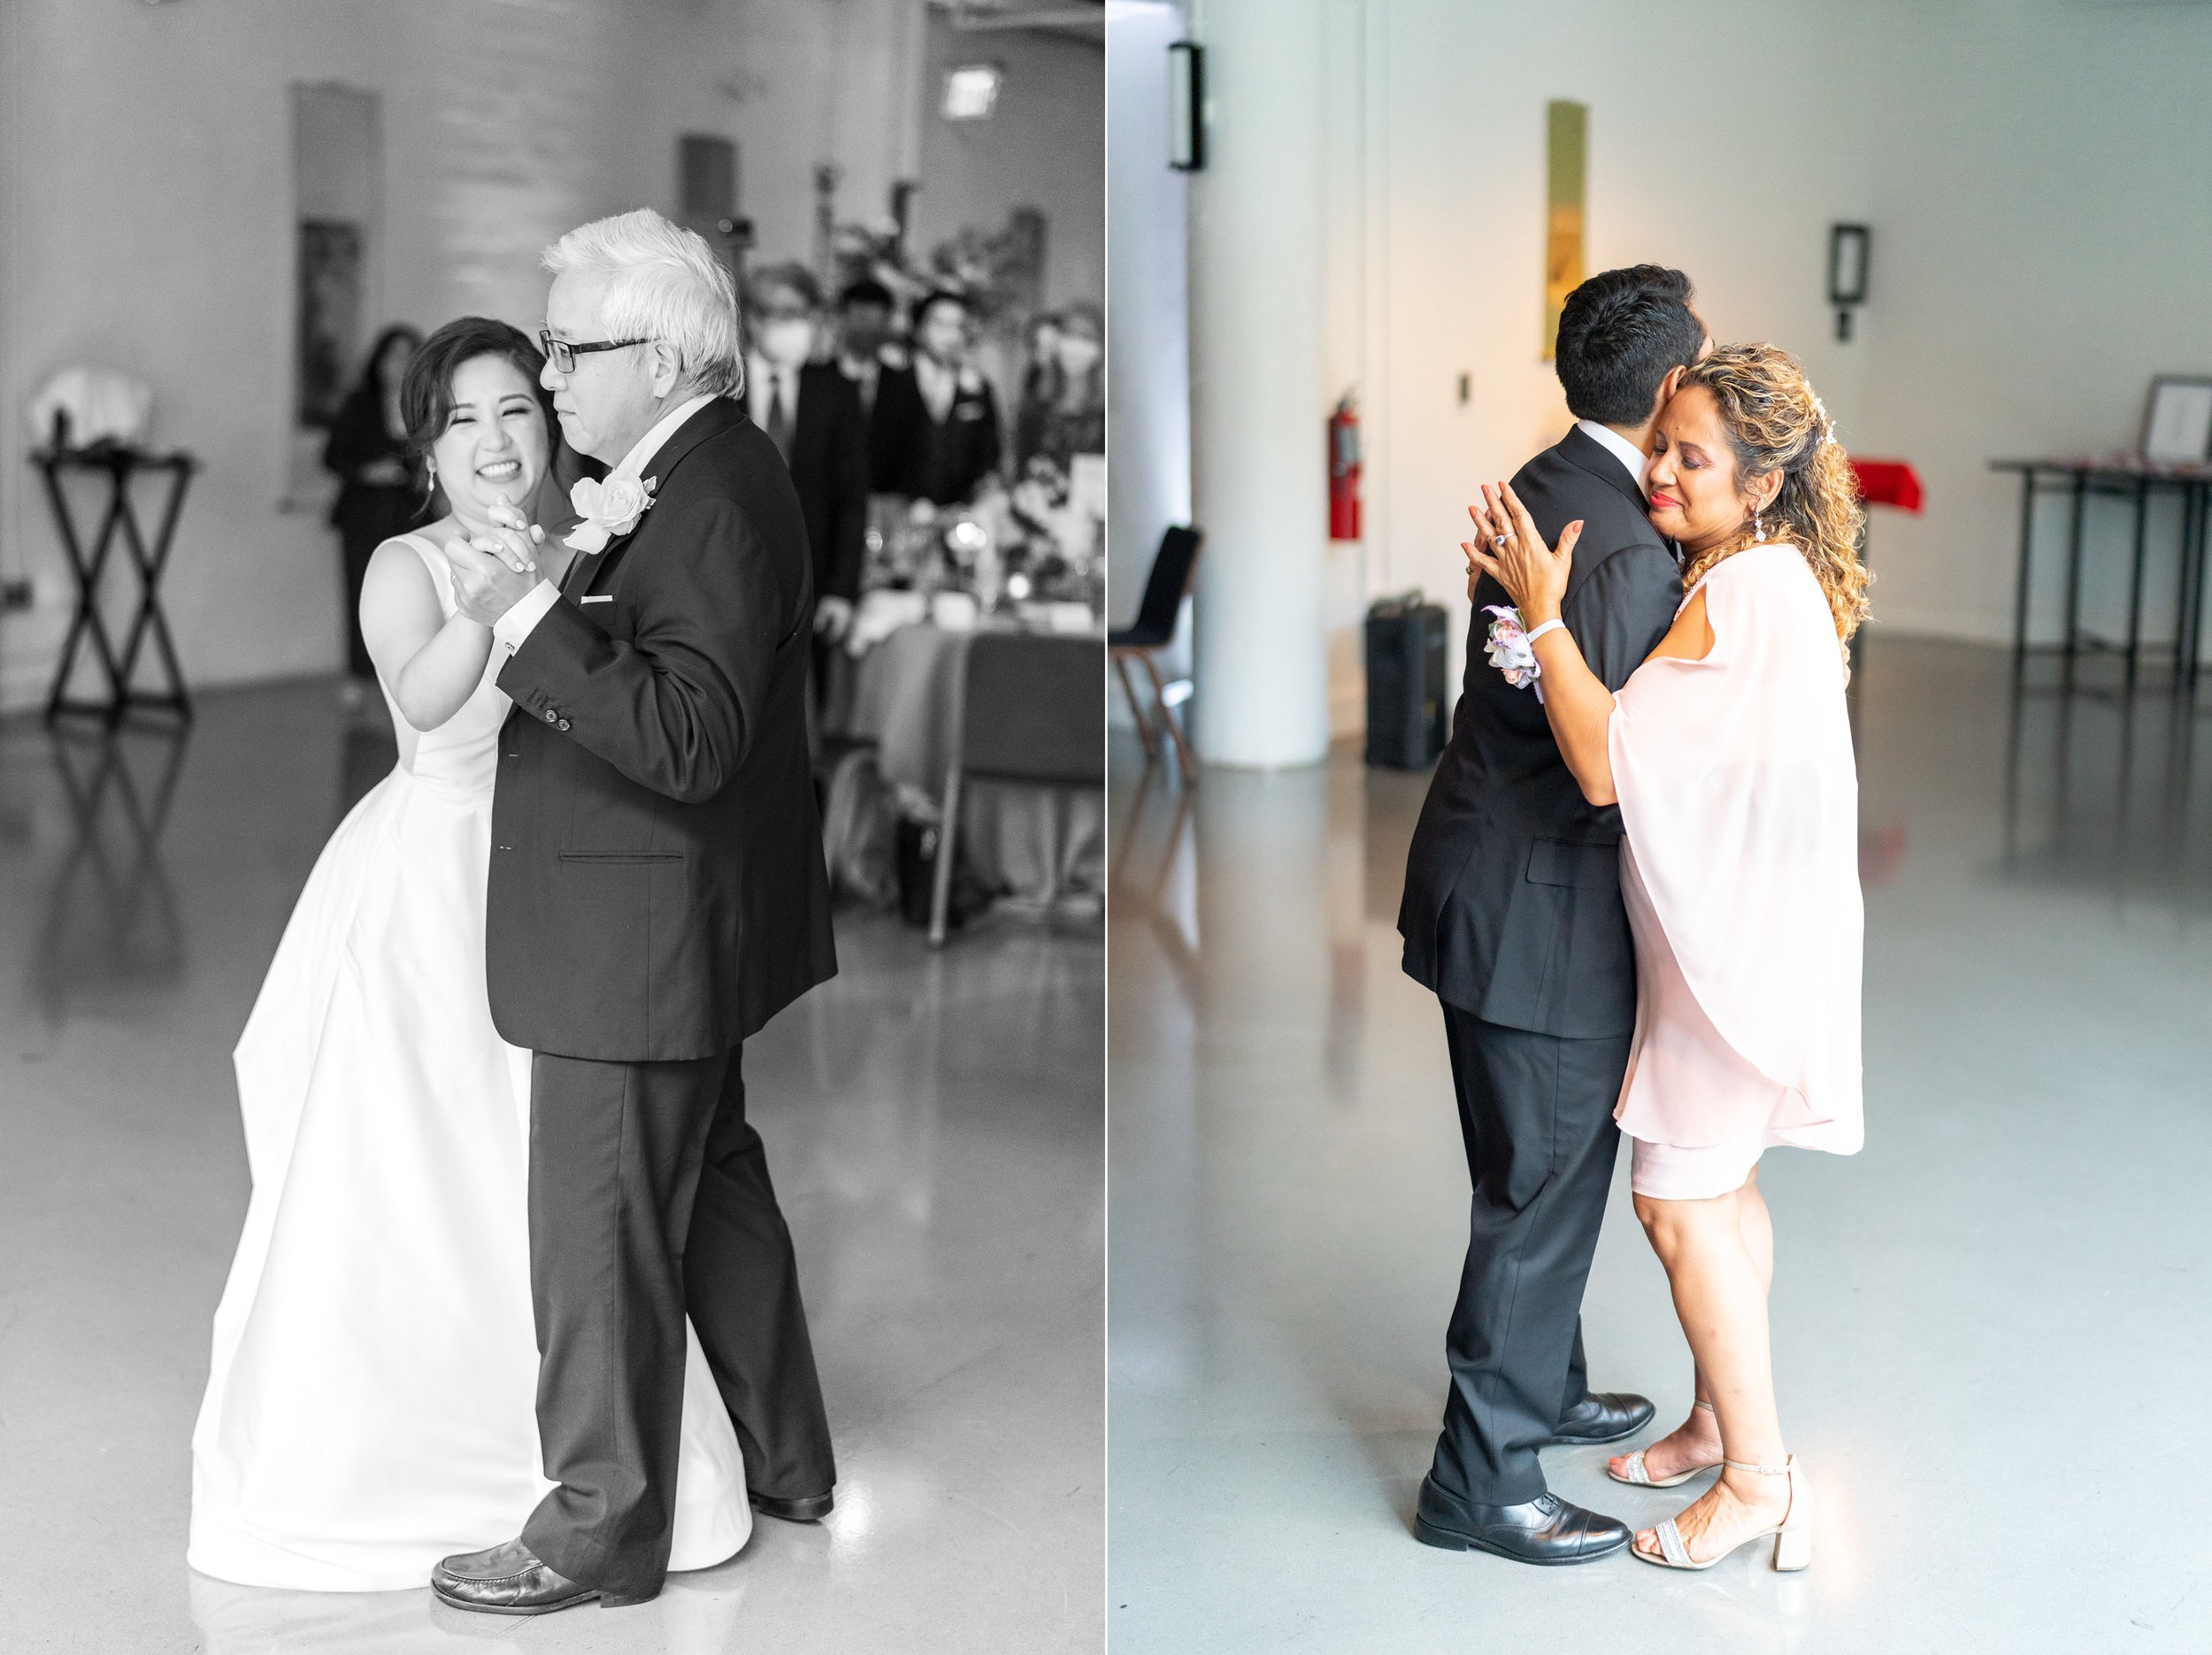 Father daughter dance and mother son dance at wedding at Eaton hotel